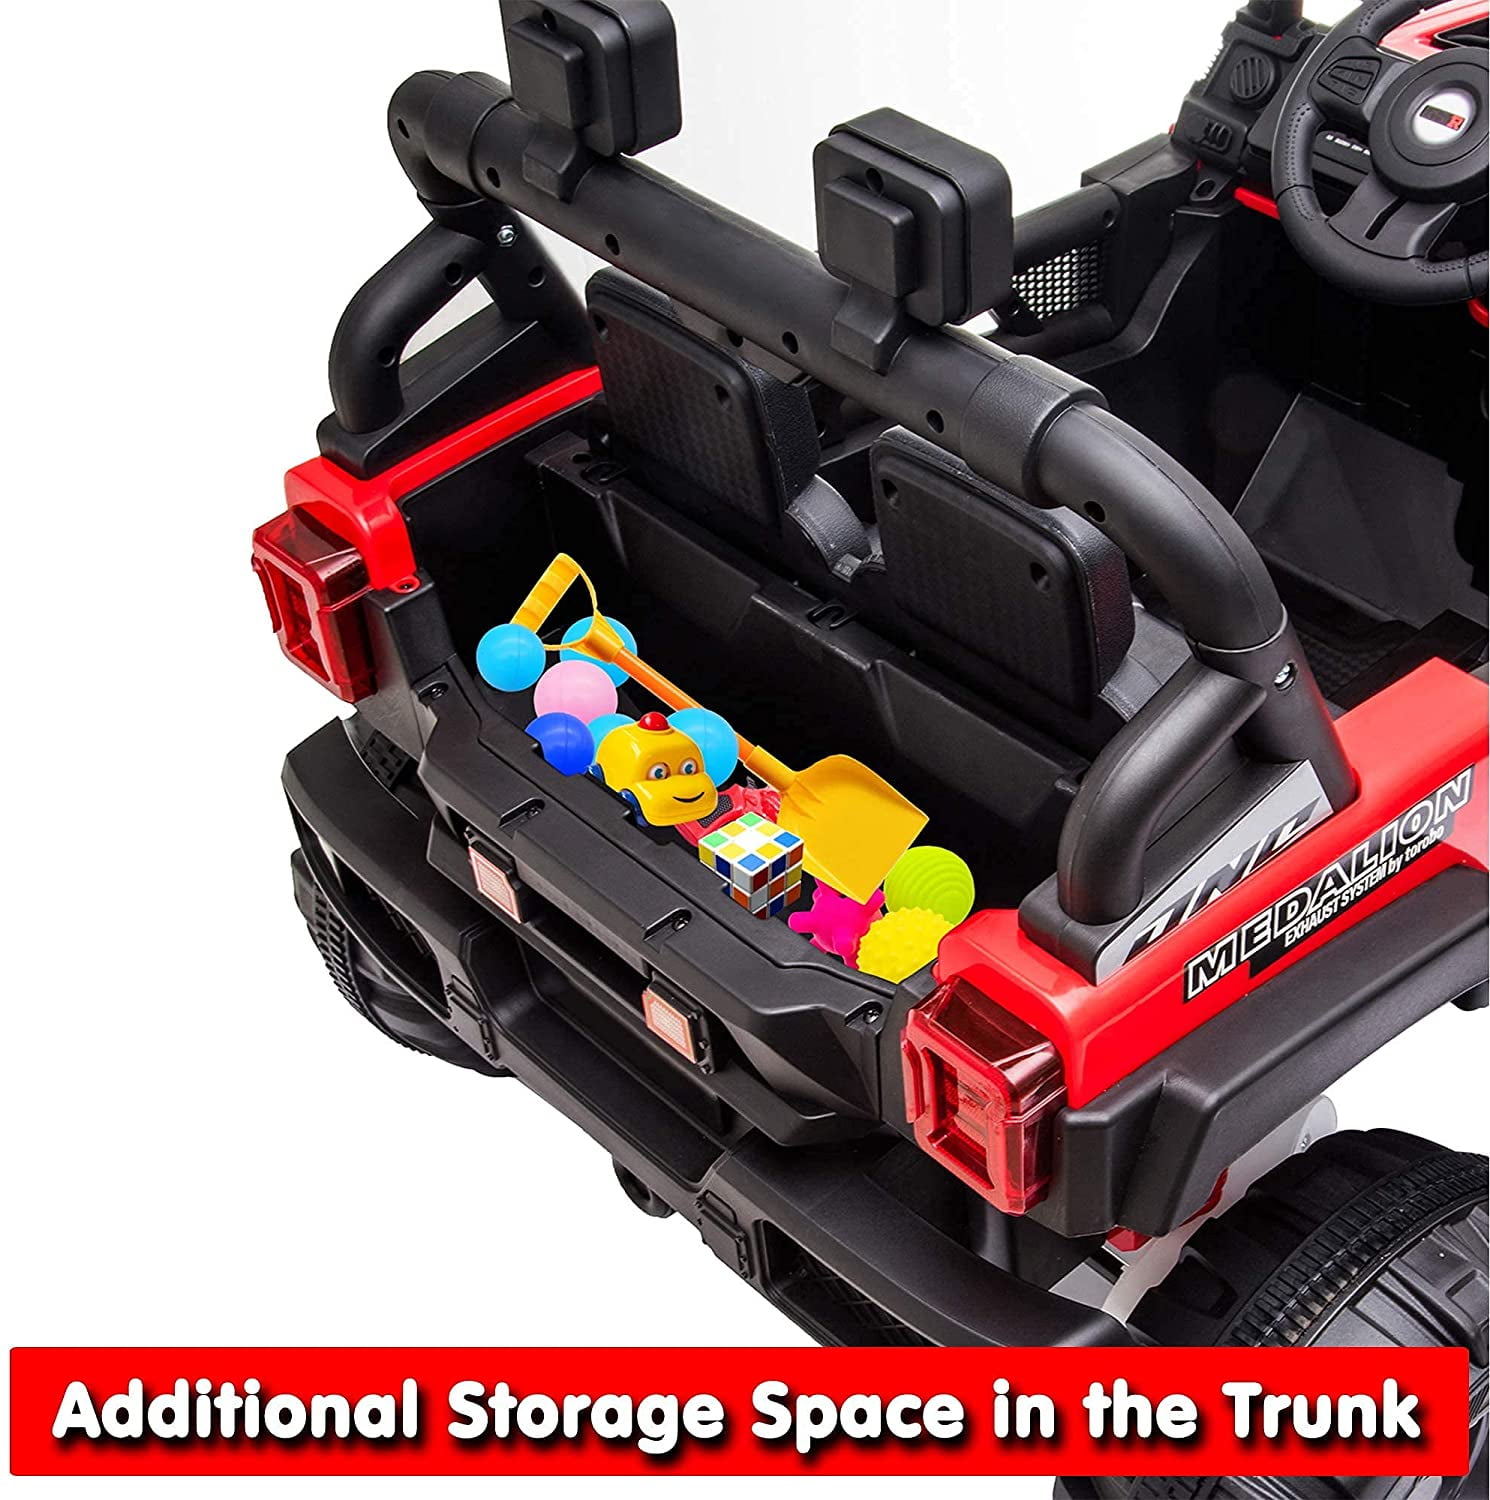 Bluetooth Powered Ride on Toy Car with Large Seat Red Electric Vehicles Kids Car with Wheels Suspension LED Lights Music sopbost 12V Ride on Car for Kids Ride On Truck with Remote Control 